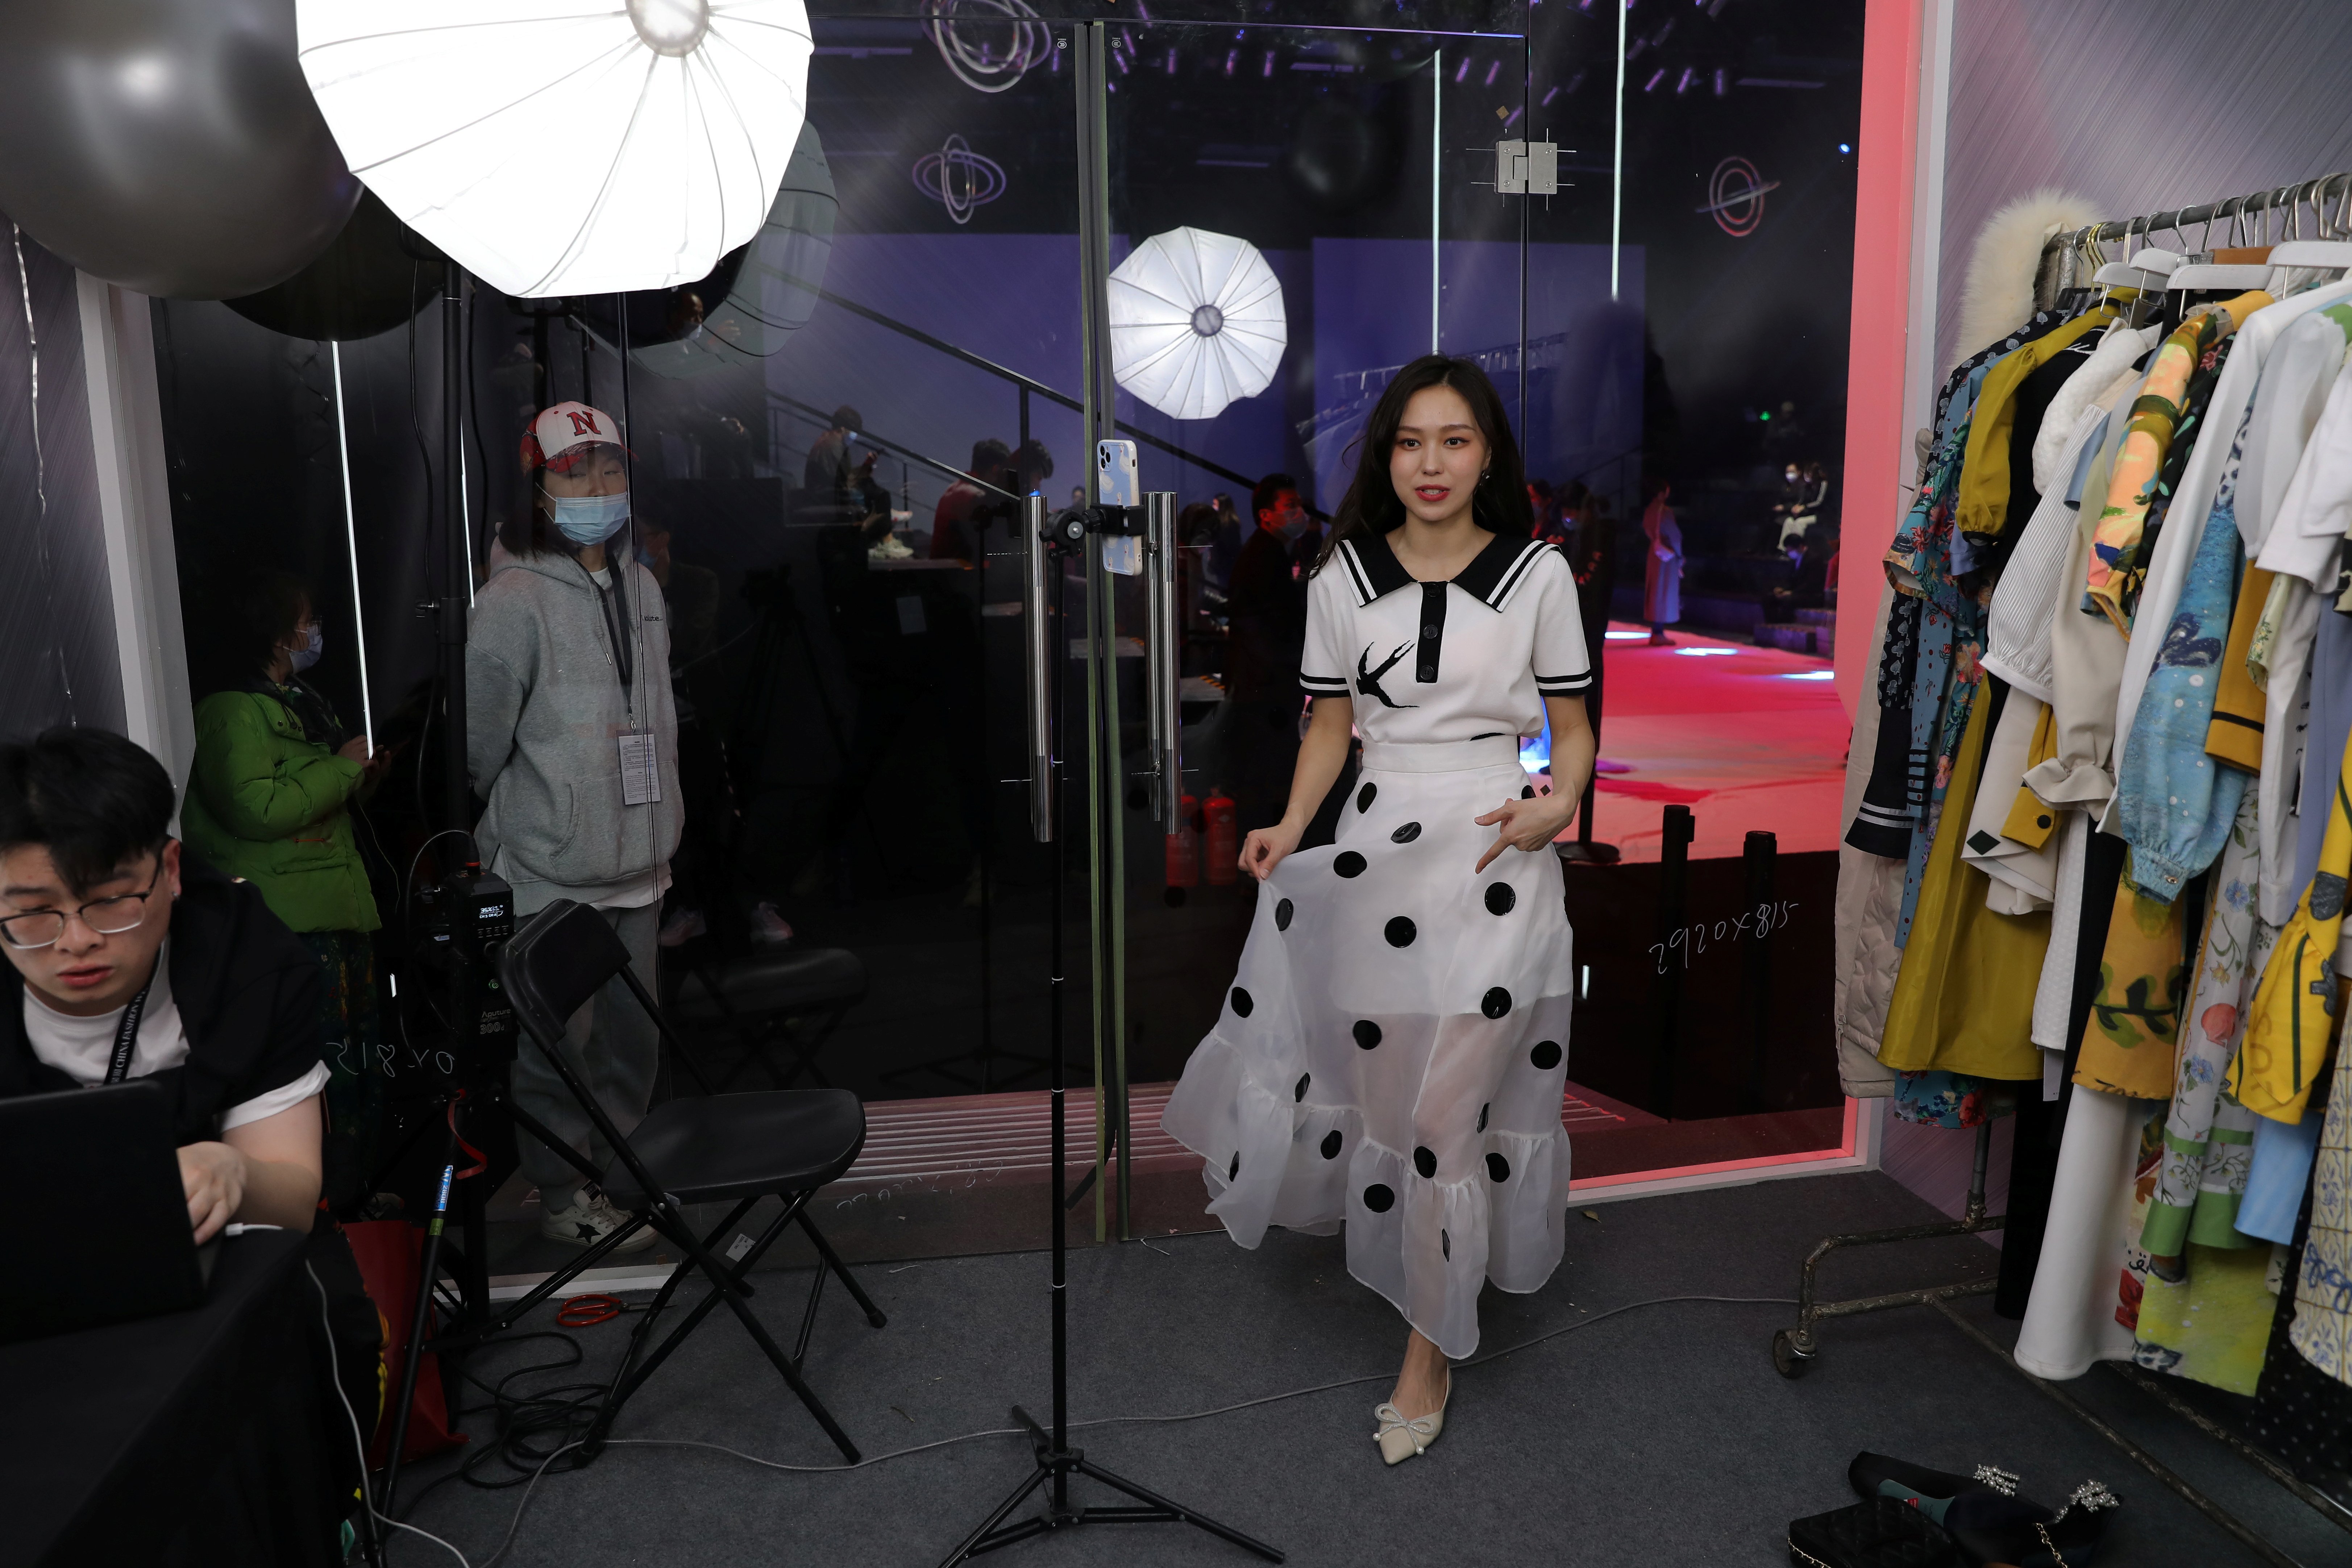 A live streamer promotes a dress during a live-streaming session, inside a booth set up at a show venue during China Fashion Week in Beijing, China, on March 31, 2021. Photo: Reuters